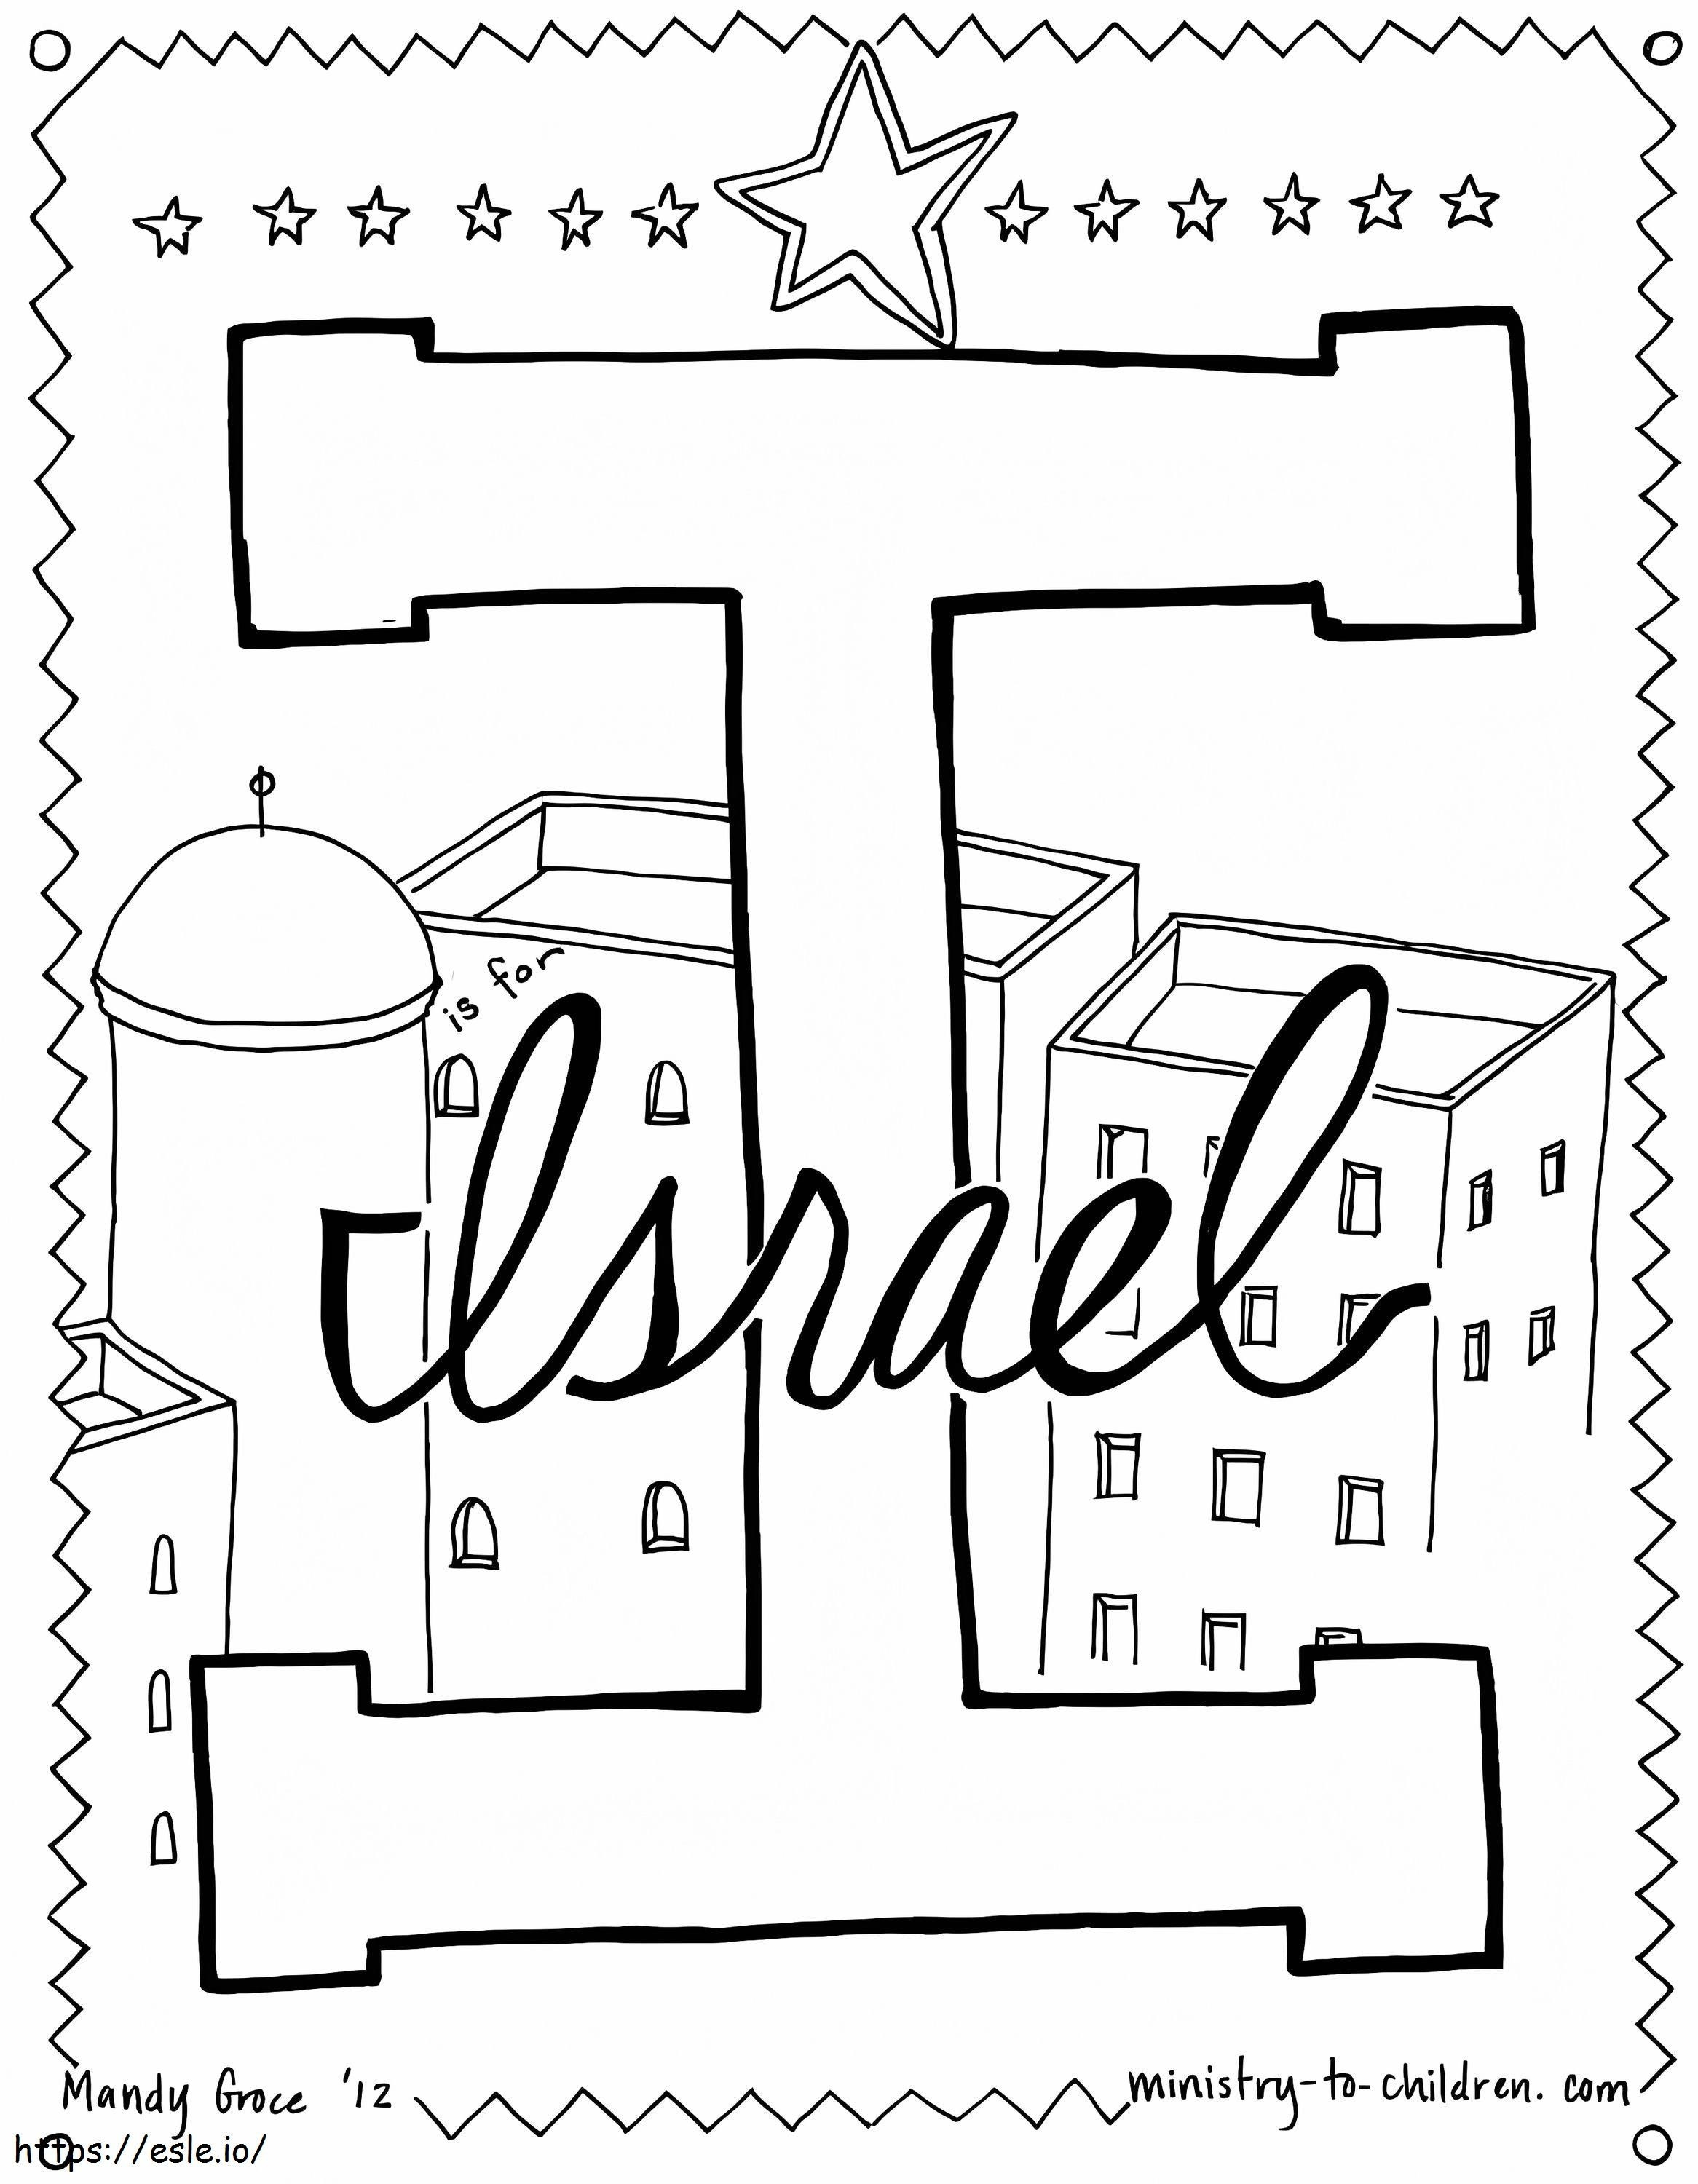 I Is For Israel coloring page